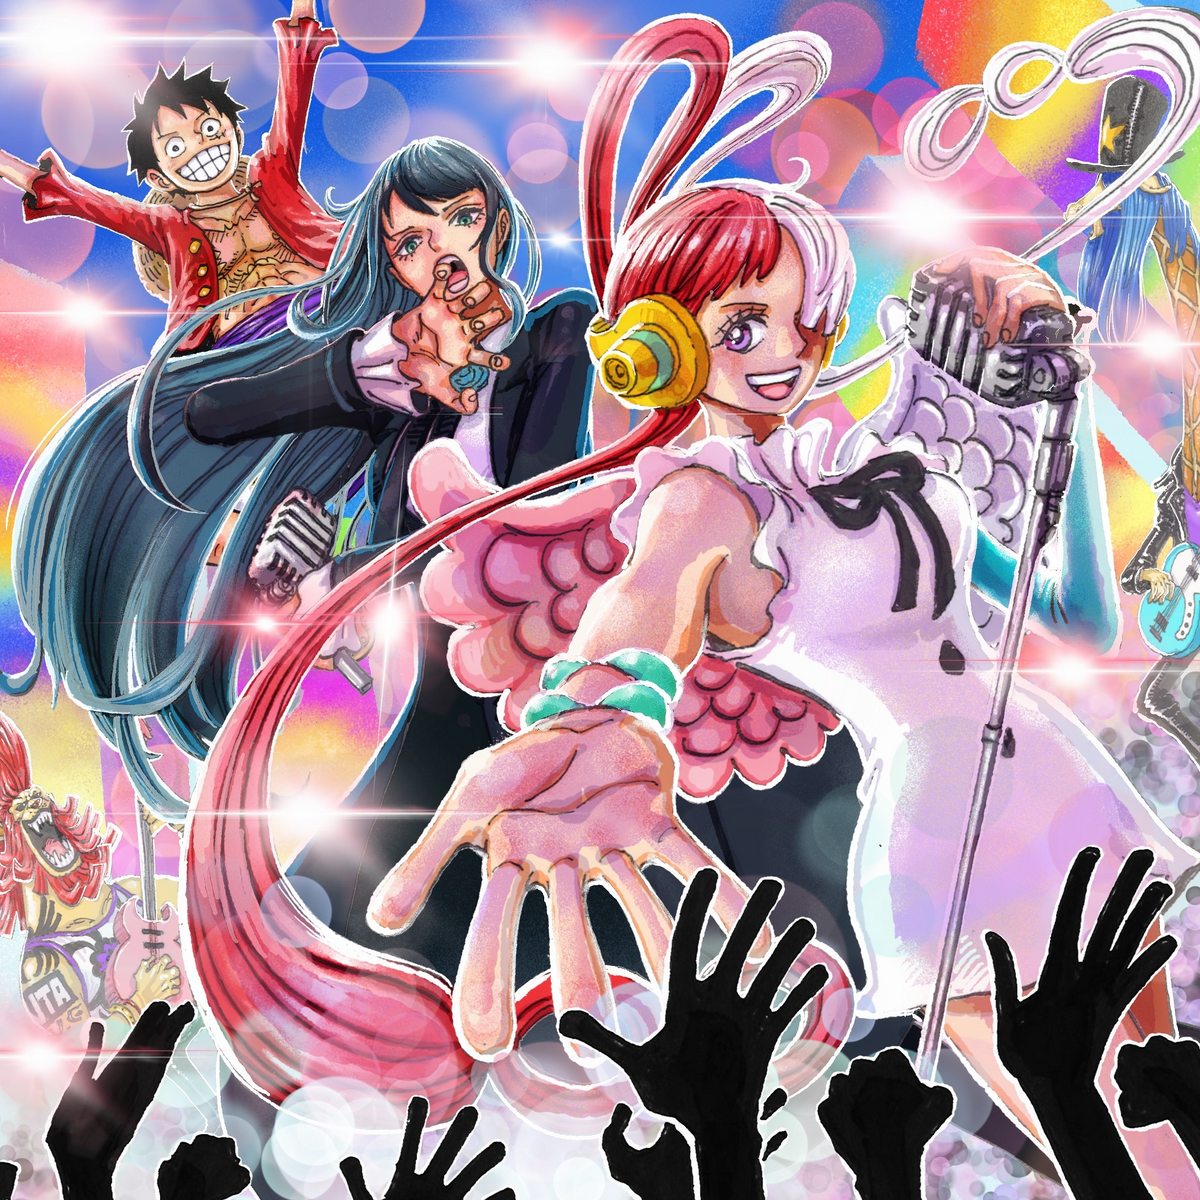 One Piece Film Red Reveals Music Festival Character Designs For